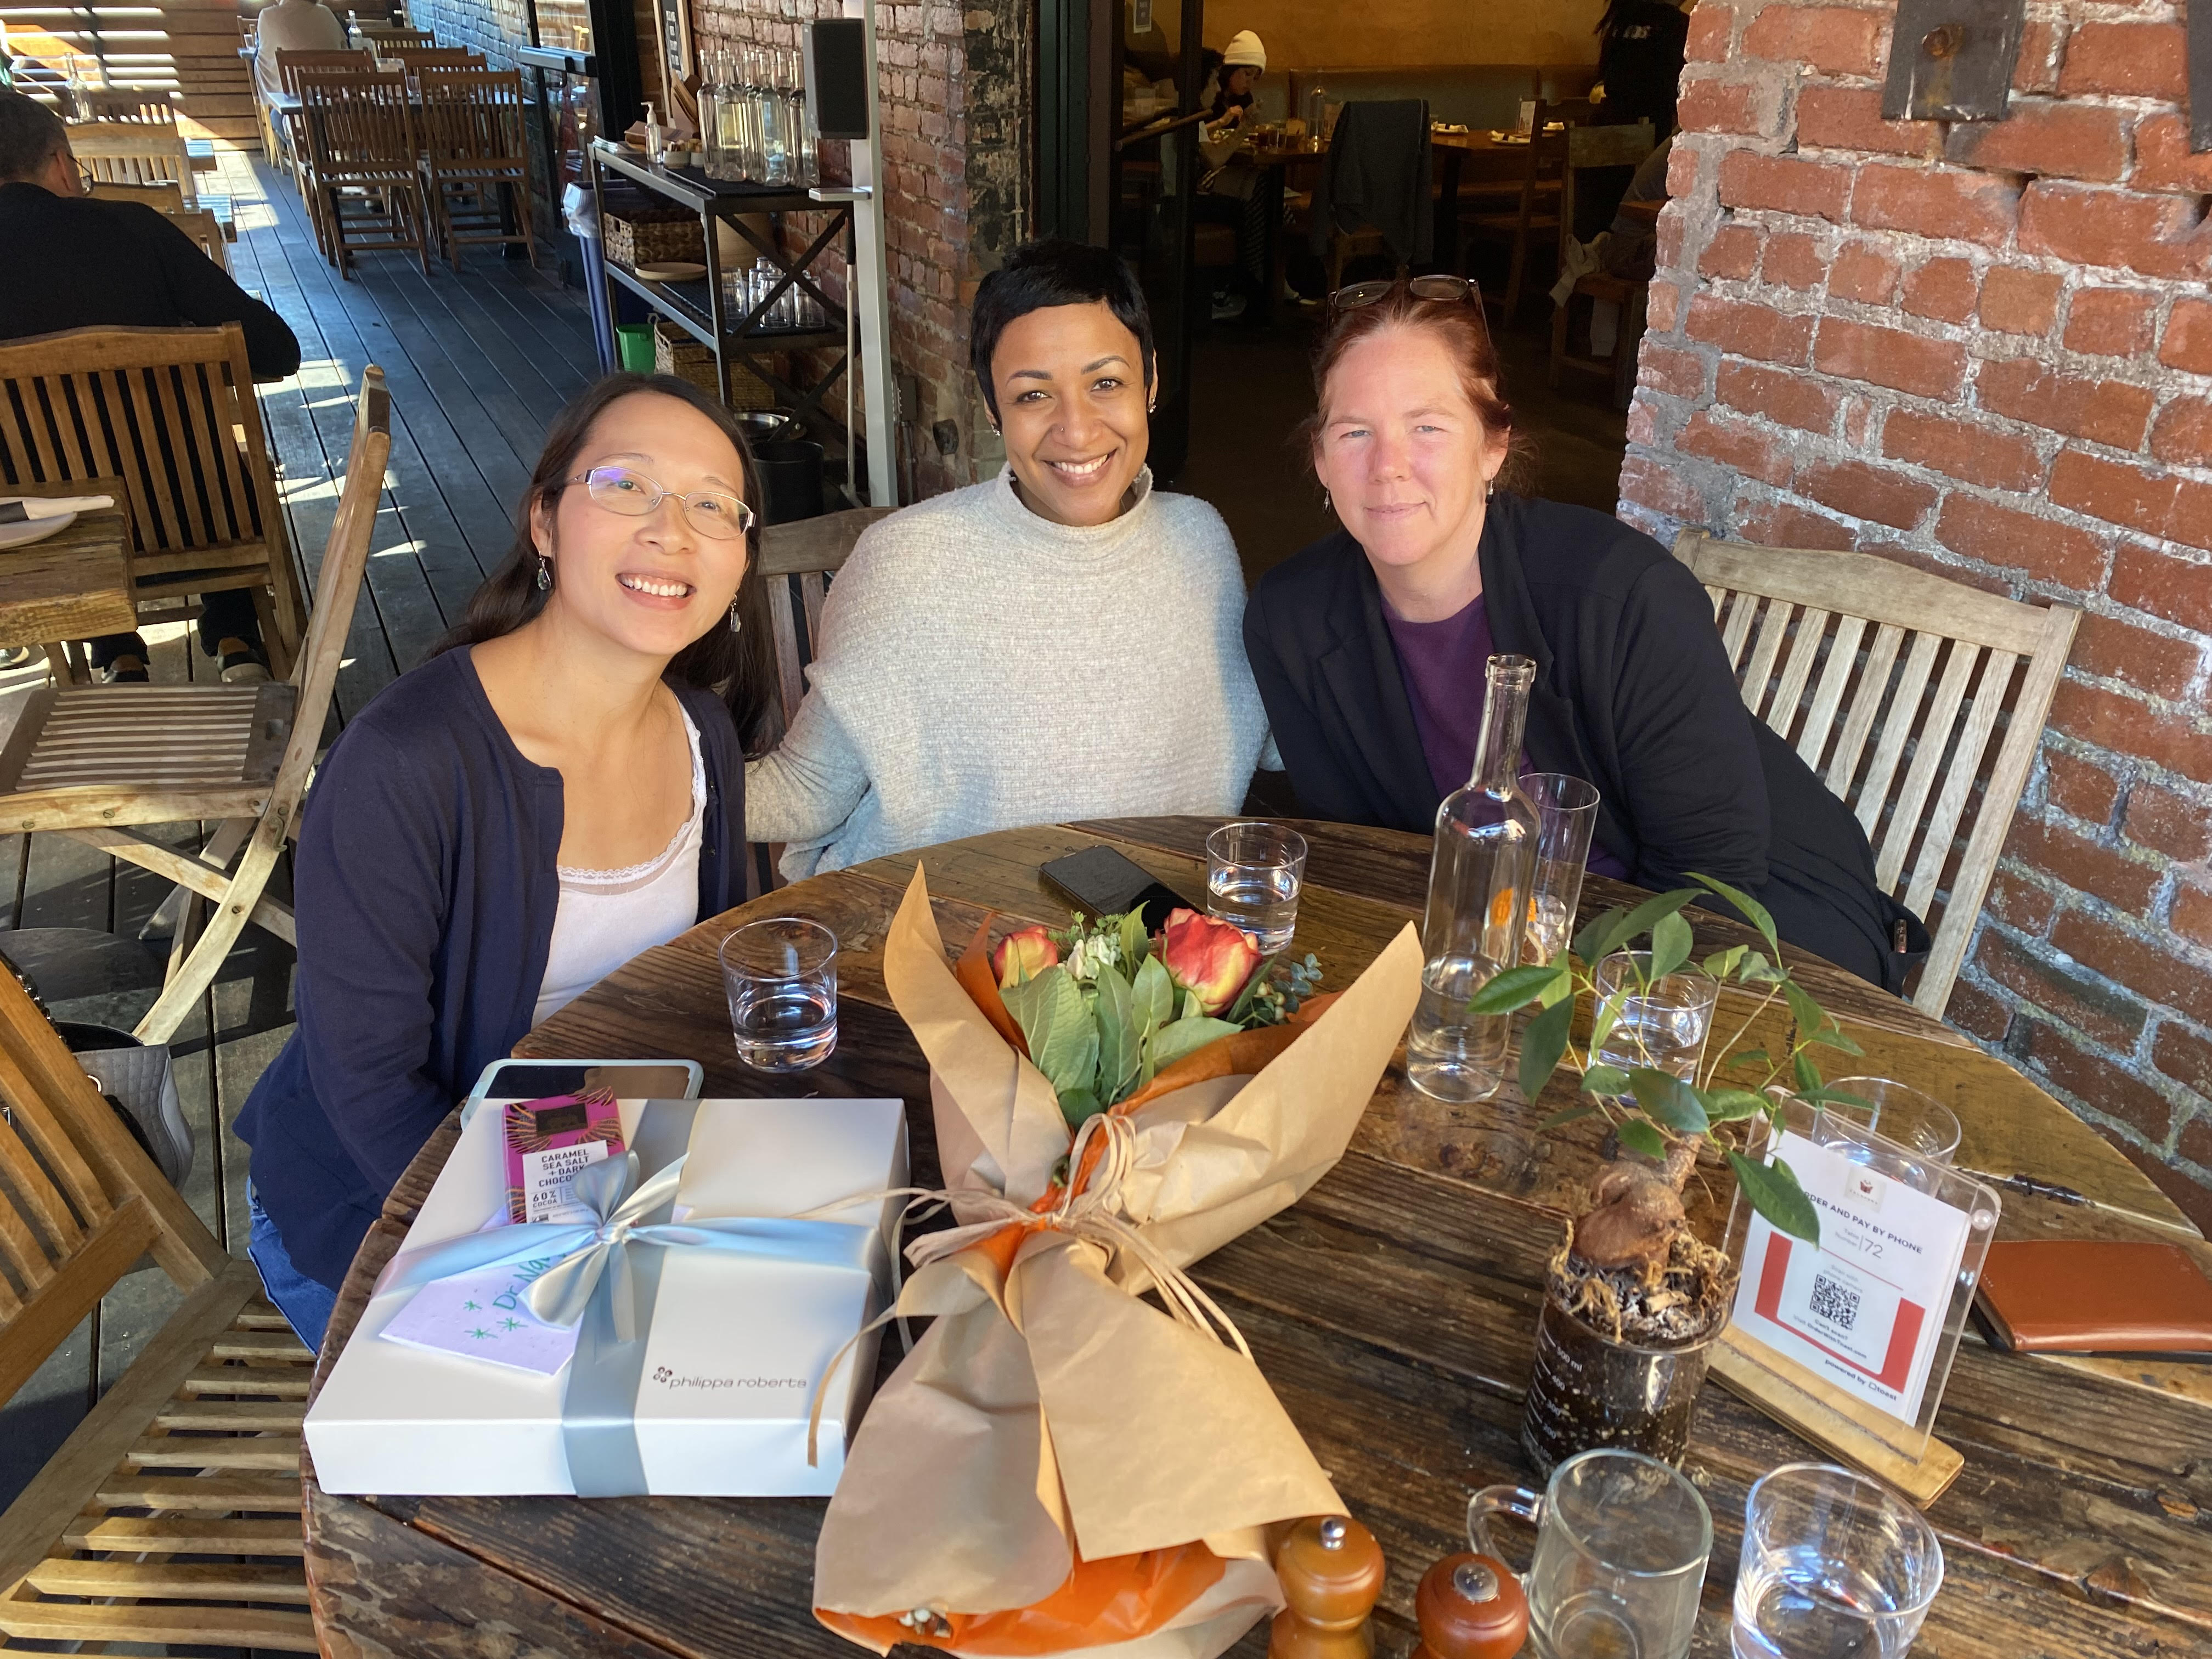 Thu Nguyen (L) with Amani Allen and Maria Glymour